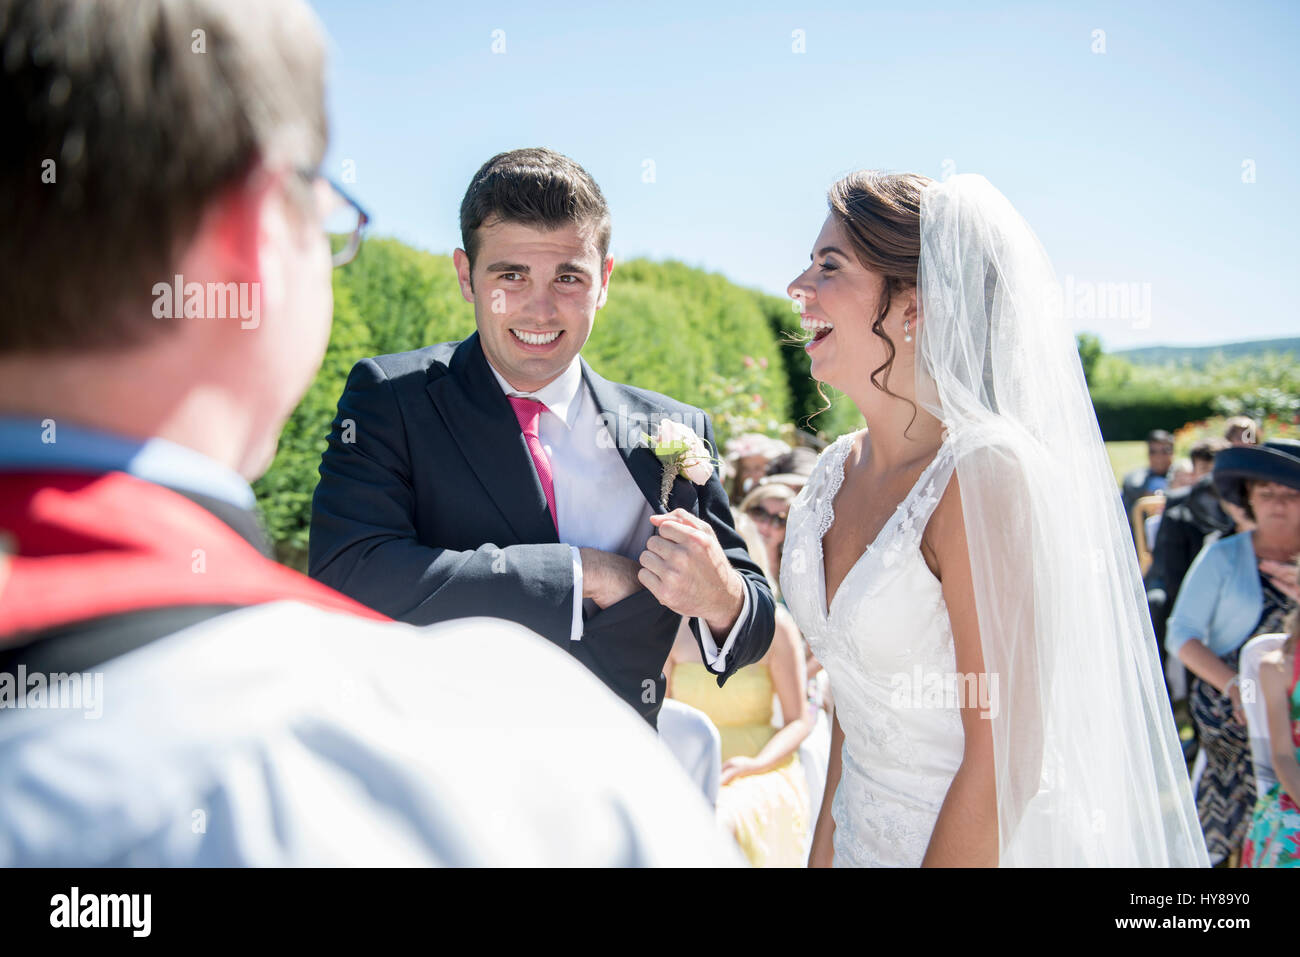 A bride and groom stand in front of a vicar at an outdoor wedding Stock Photo